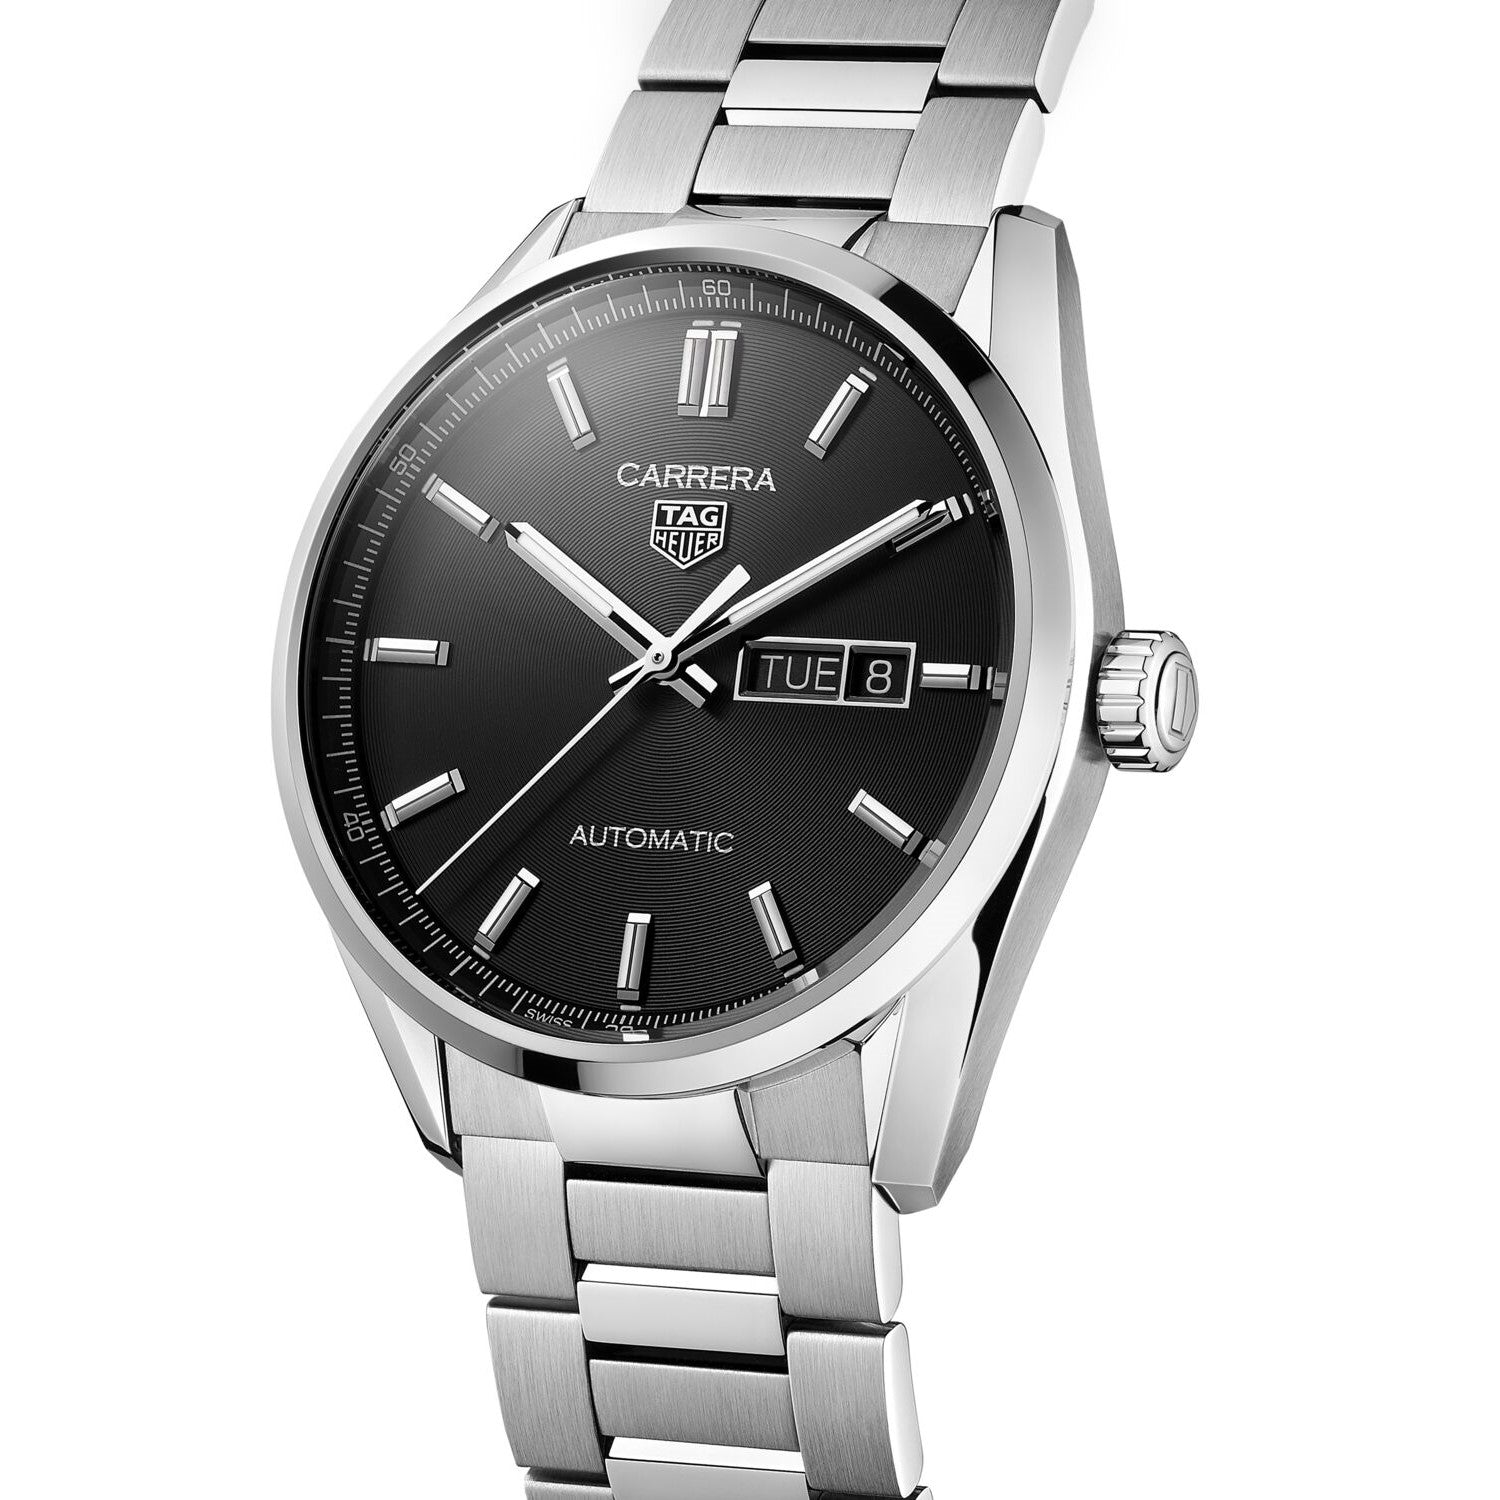 TAG Heuer Carrera 41mm Day-Date, model #WBN2010.BA0640, at IJL Since 1937